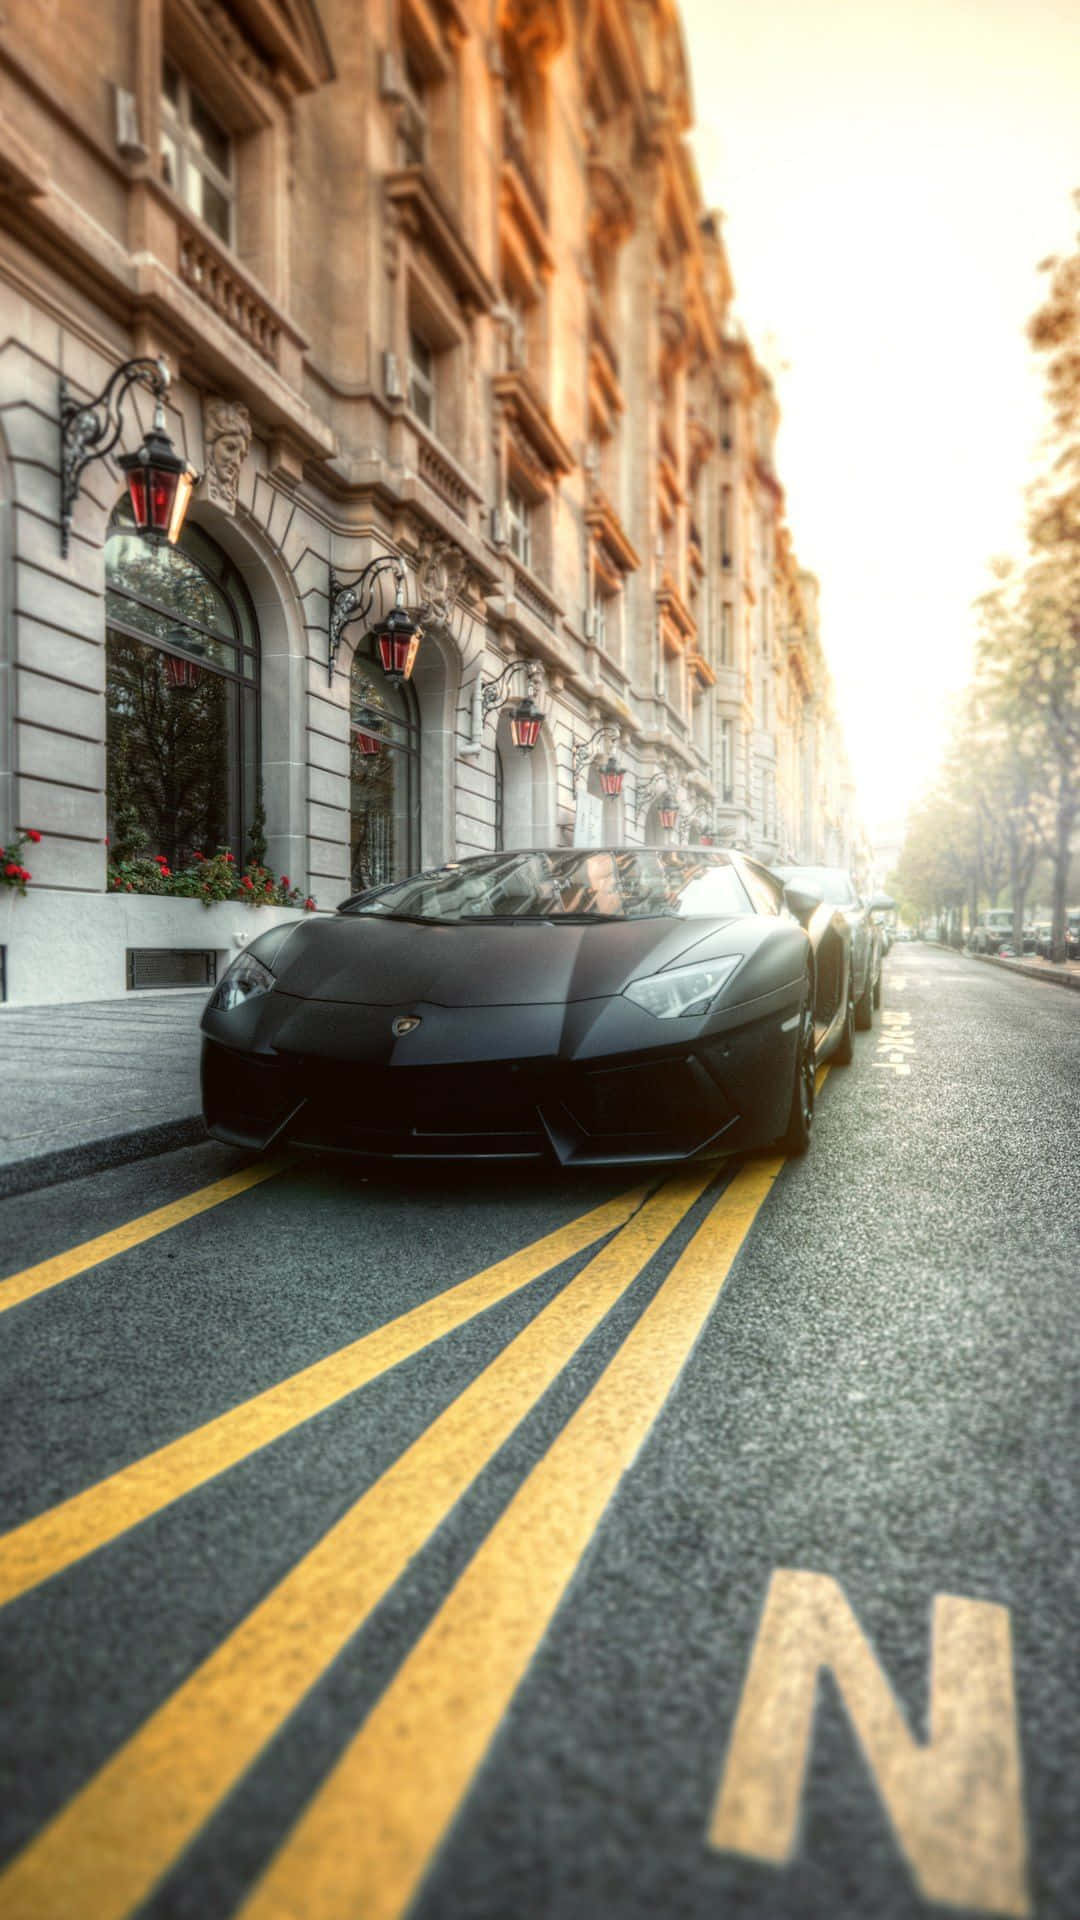 Get your hands on the luxurious Lamborghini Phone Wallpaper